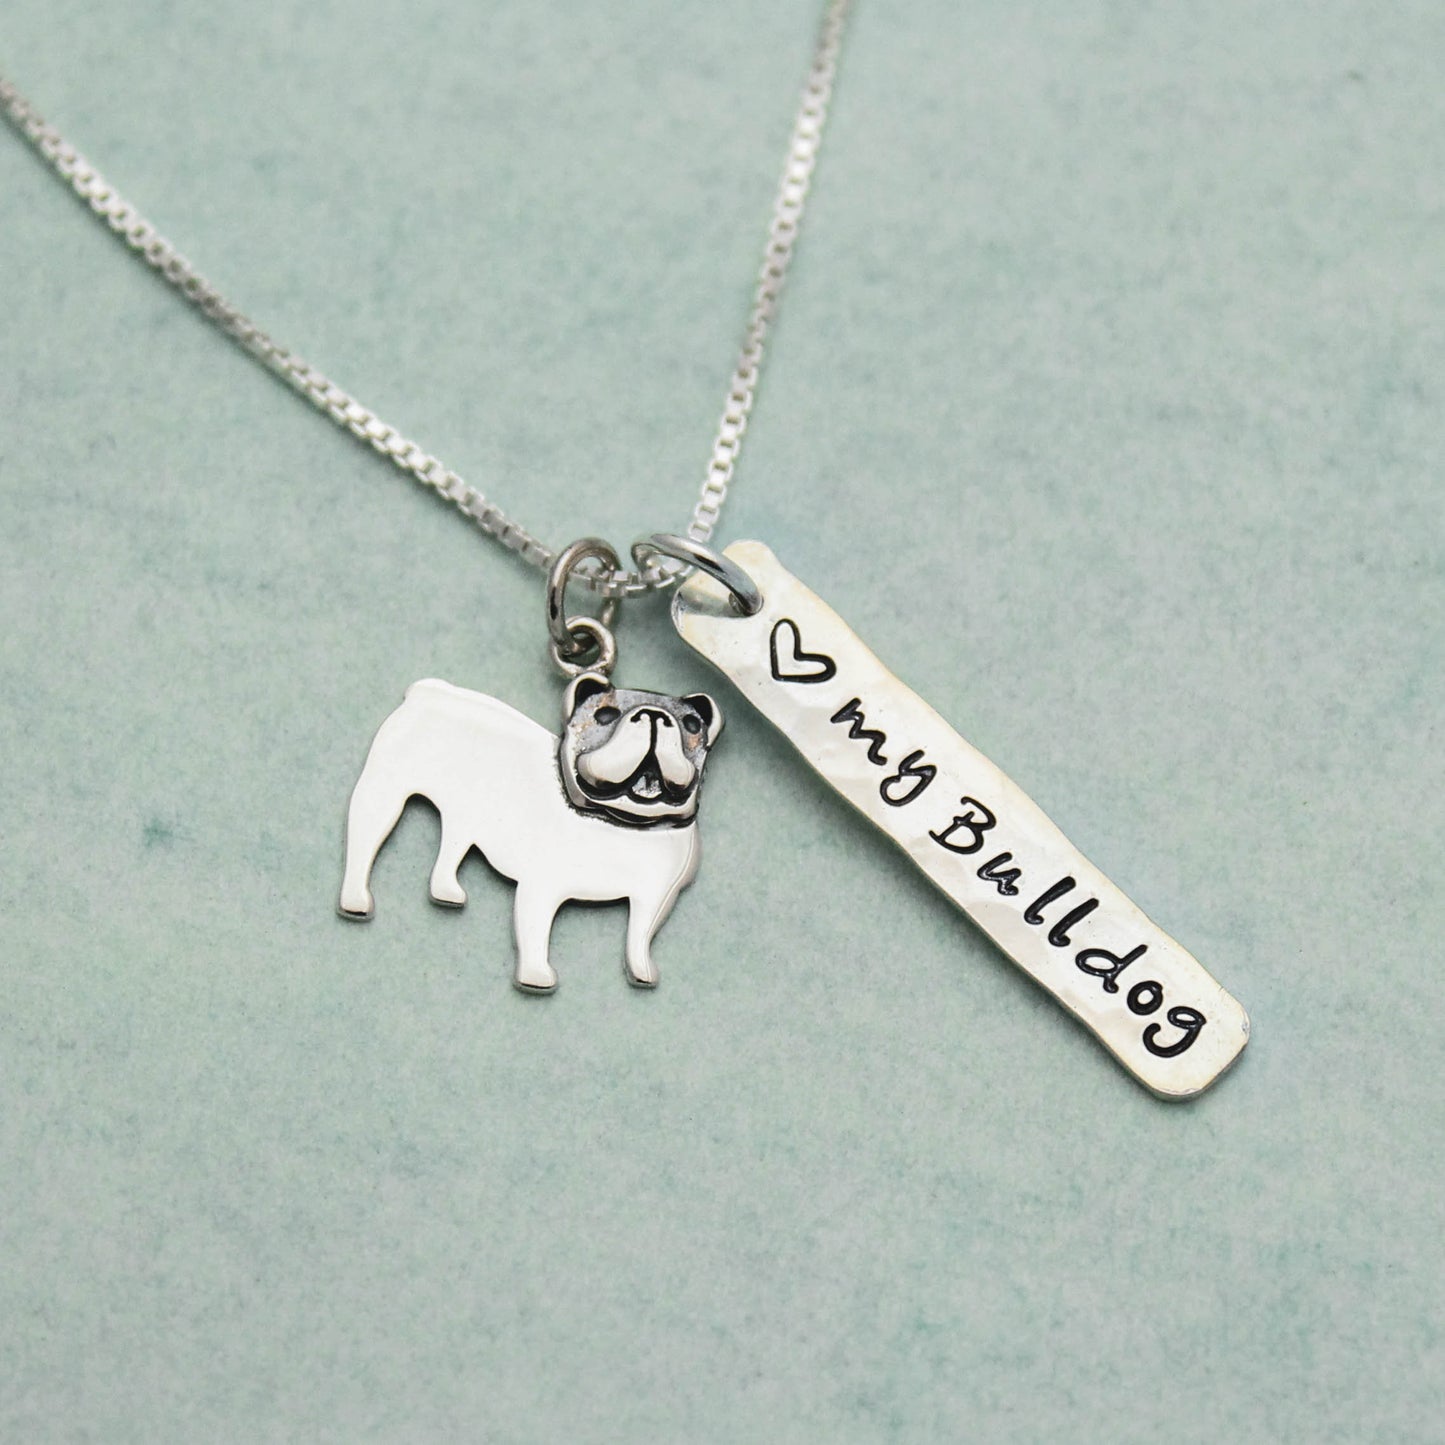 LOVE my Bulldog Necklace, Sterling Silver English Bulldog Necklace, Bulldog Lover Gift, Bulldog Dog Jewelry, English Bulldog Gift for Her